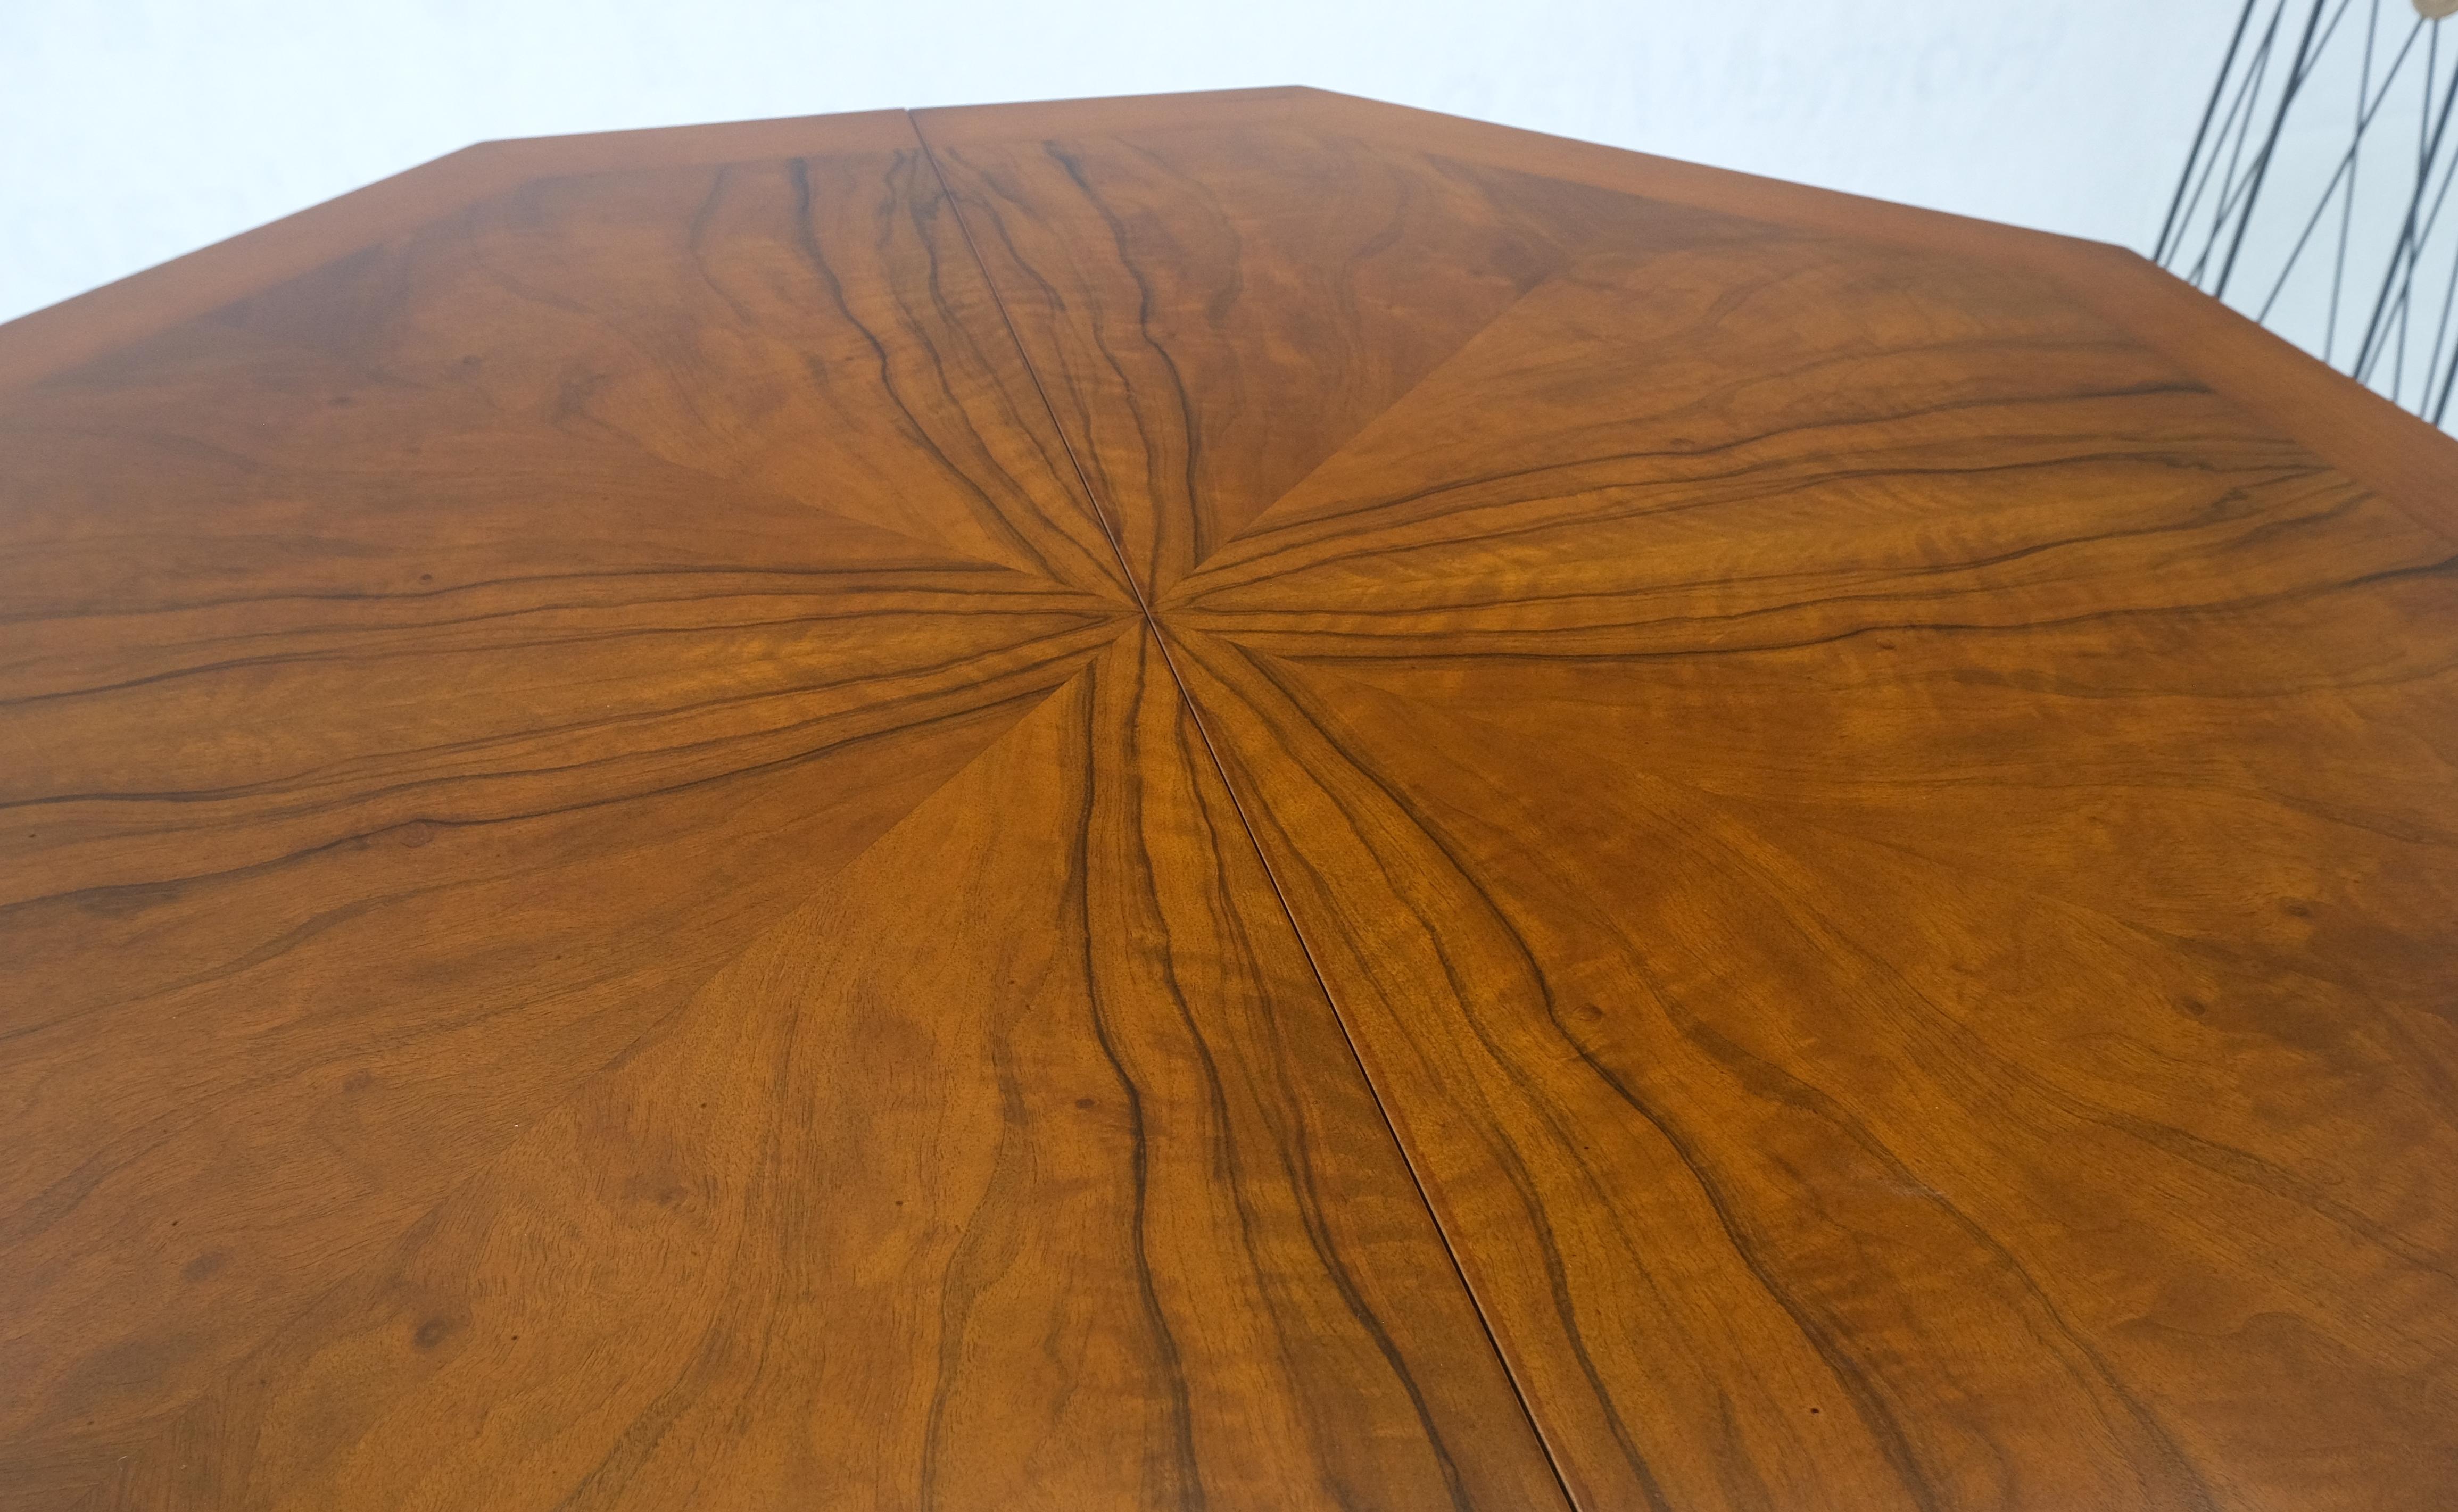 Baker LIght Walnut Round Octagon Single Base Two Leaves Dining Room Table Mint!
Two leaves are 23.75